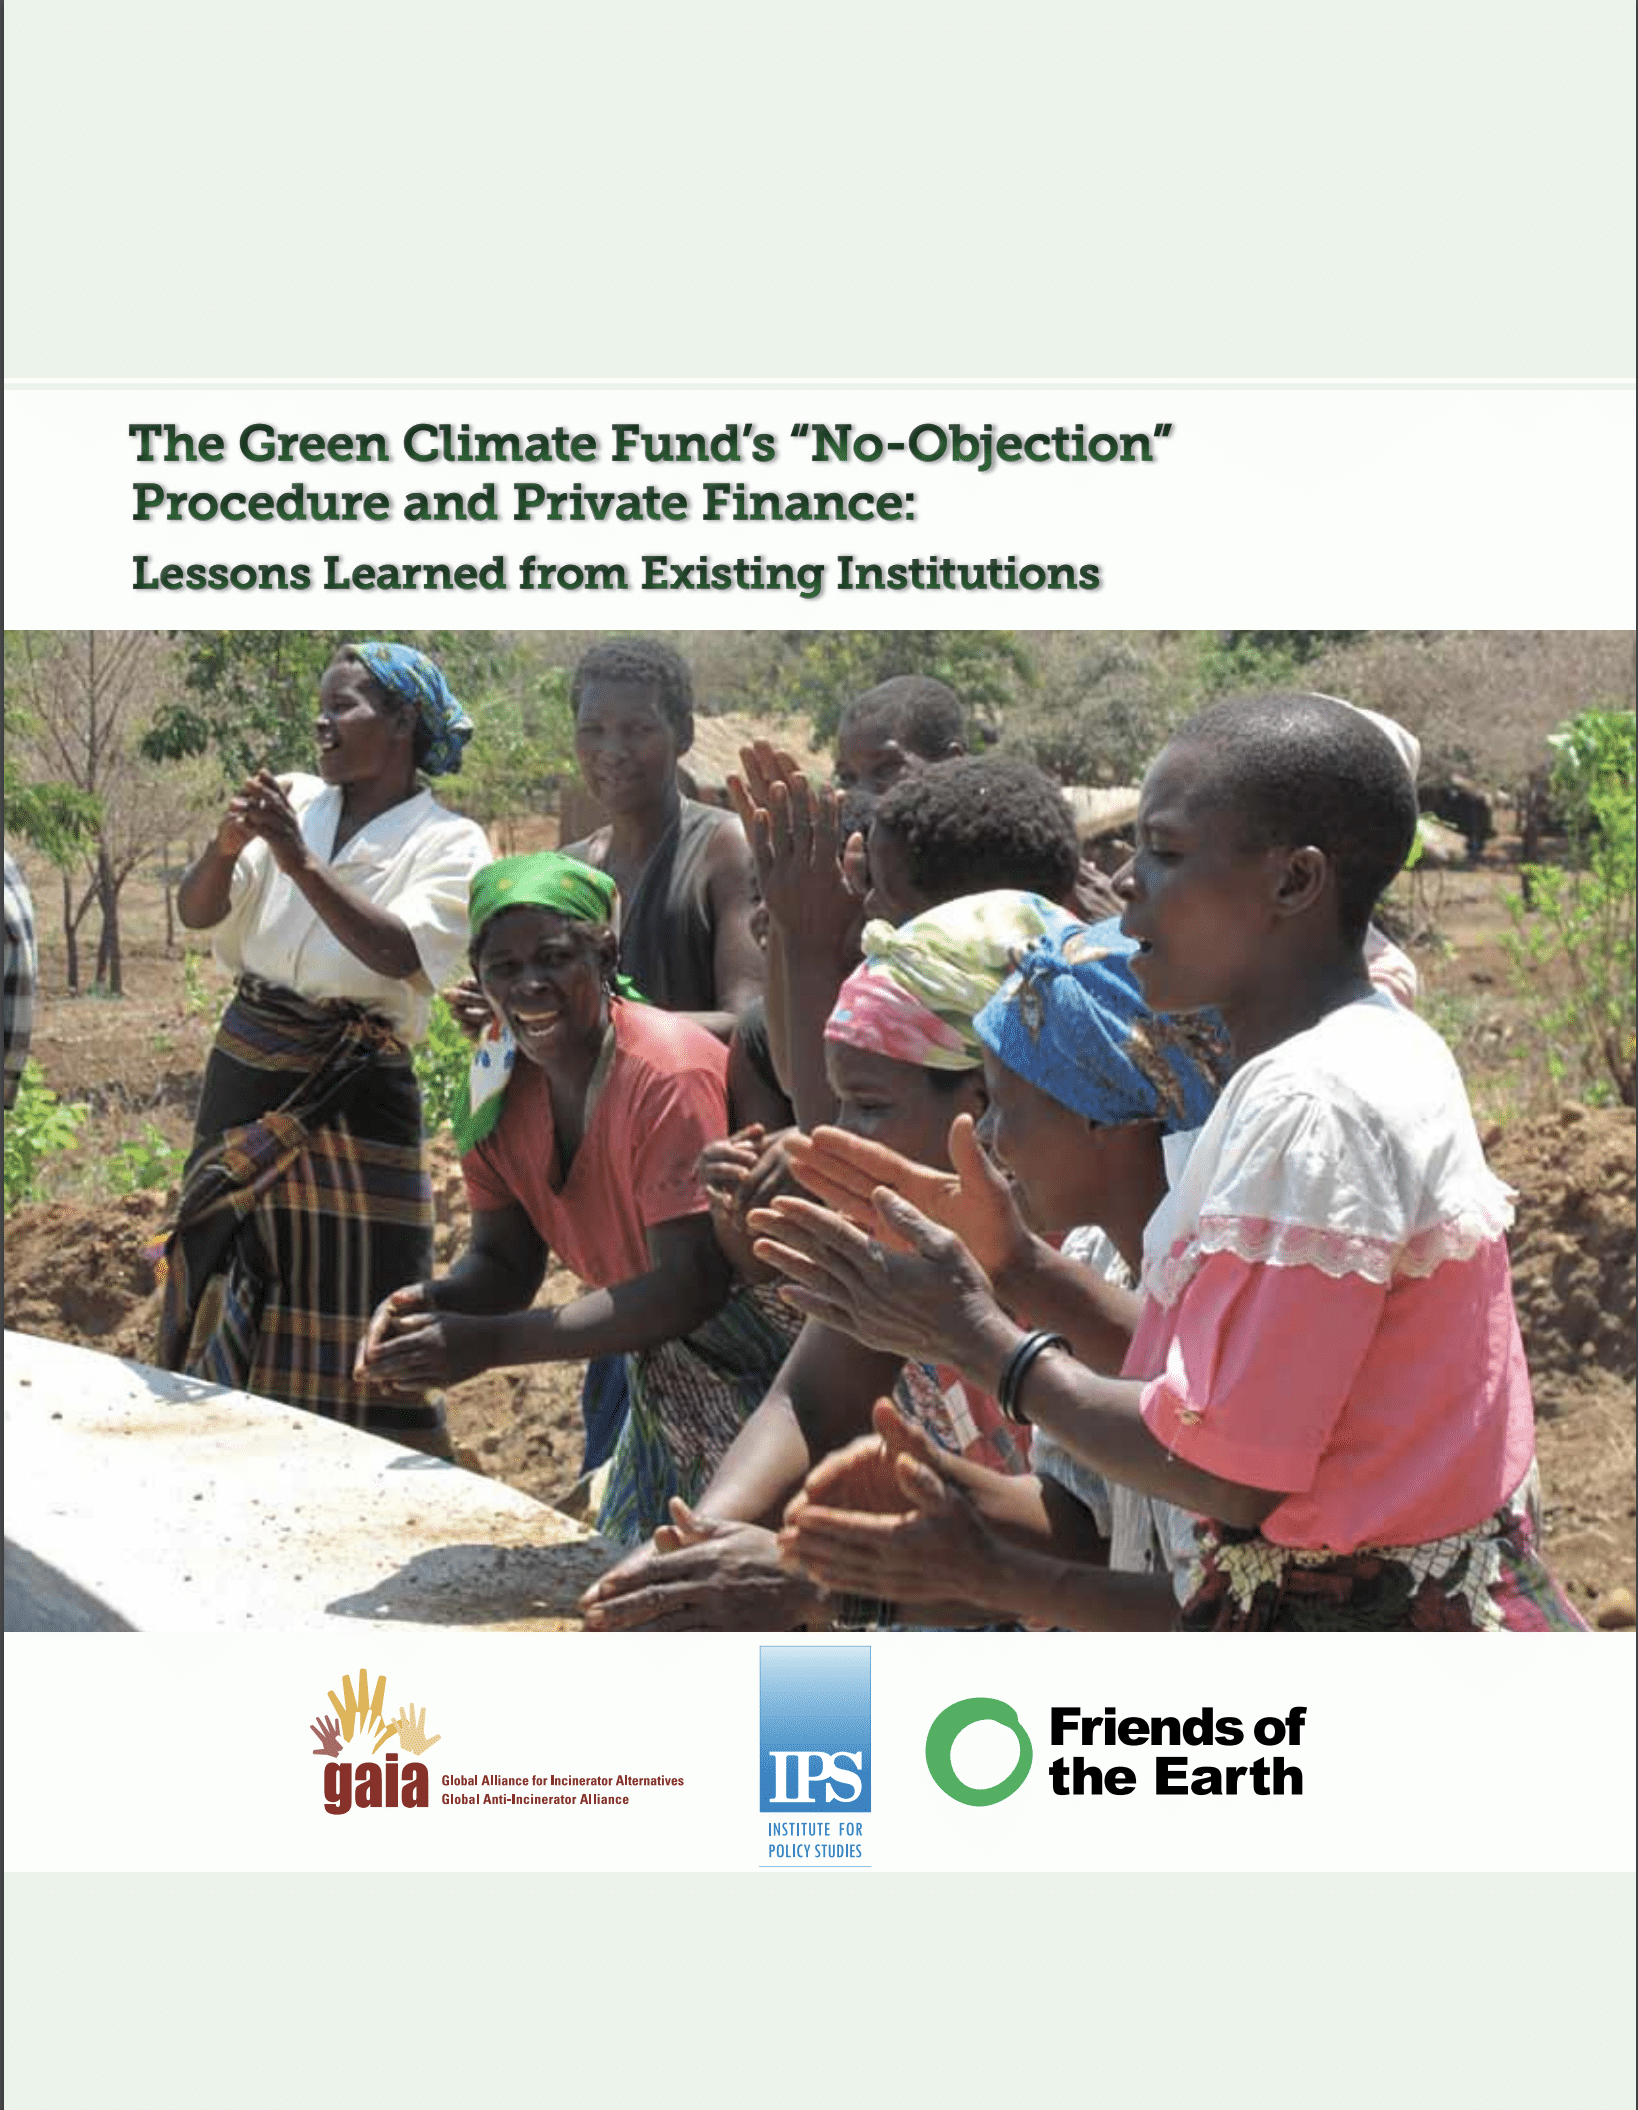 The Green Climate Fund’s No-Objection Procedure and Private Finance: Lessons Learned from Existing Institutions